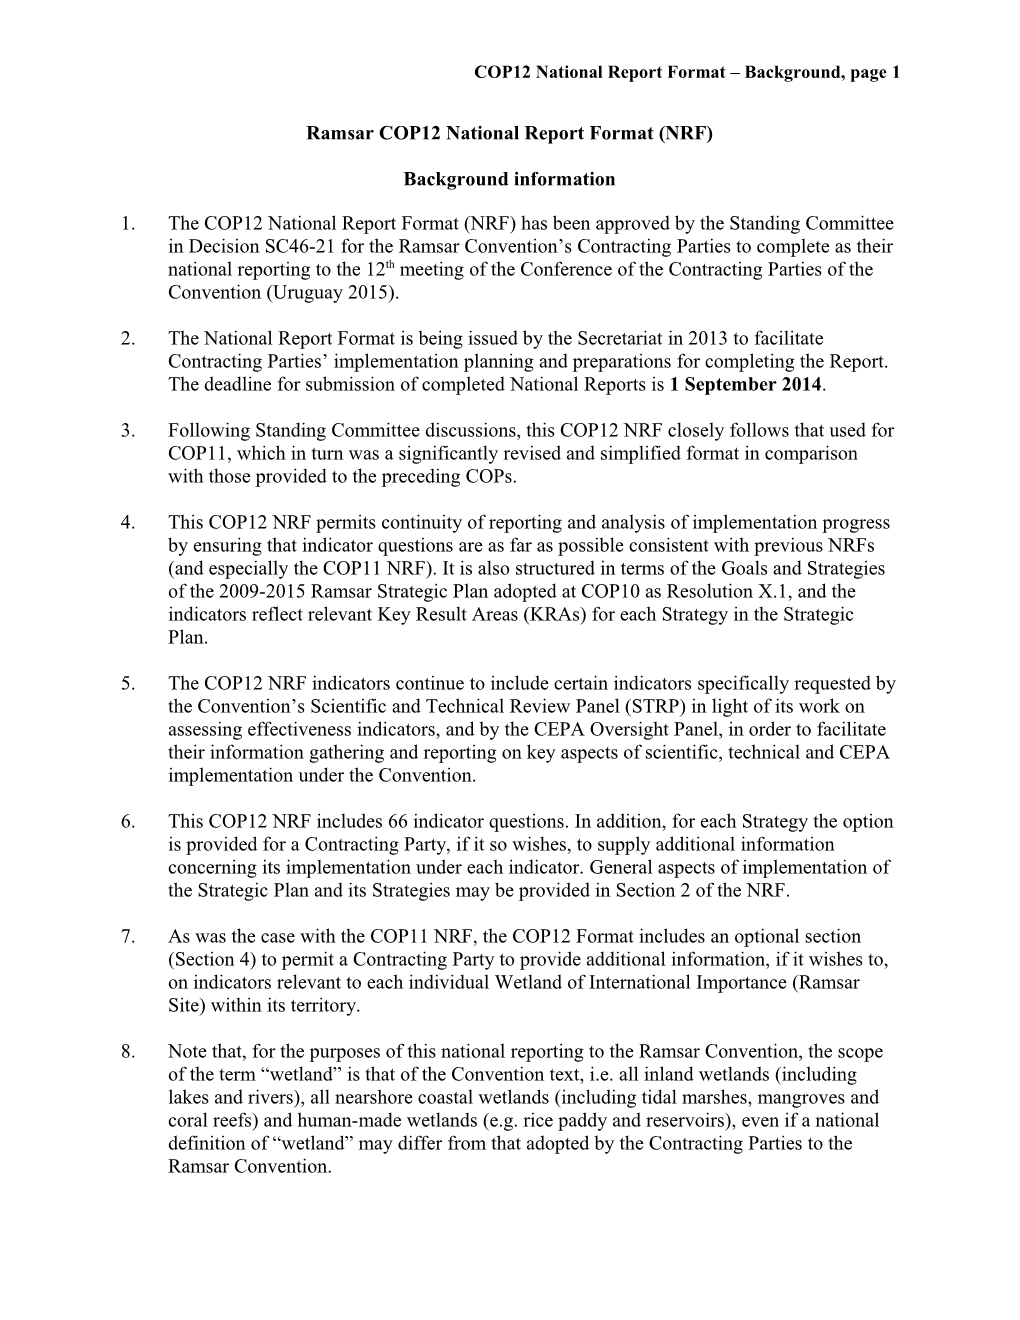 COP12 National Report Format Background, Page 1